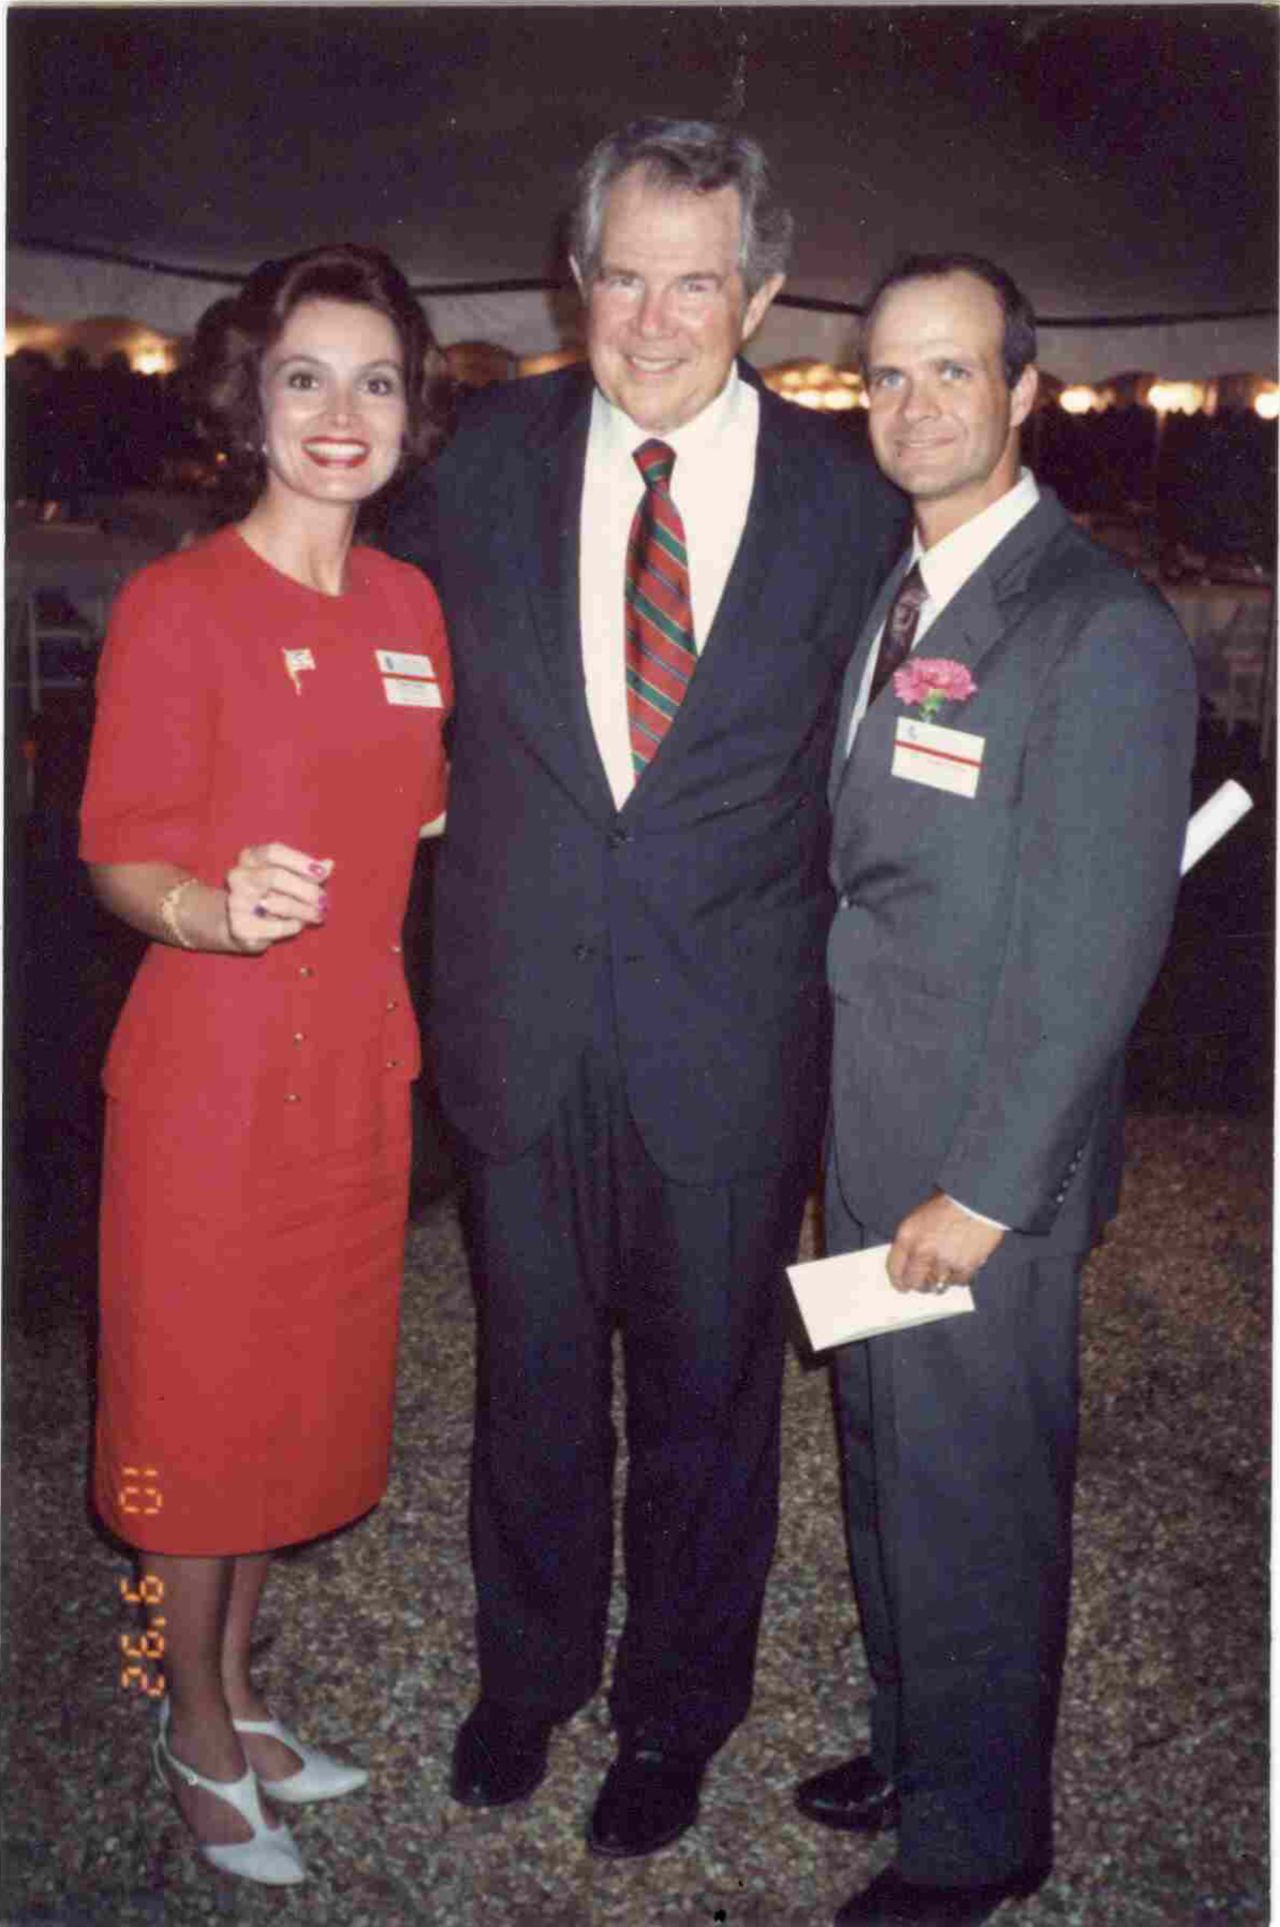 Costa and her husband, Louis, right, attend a Christian Coalition reception at televangelist Pat Robertson's home in fall 1992. Costa helped launch the coalition's South Carolina chapter.